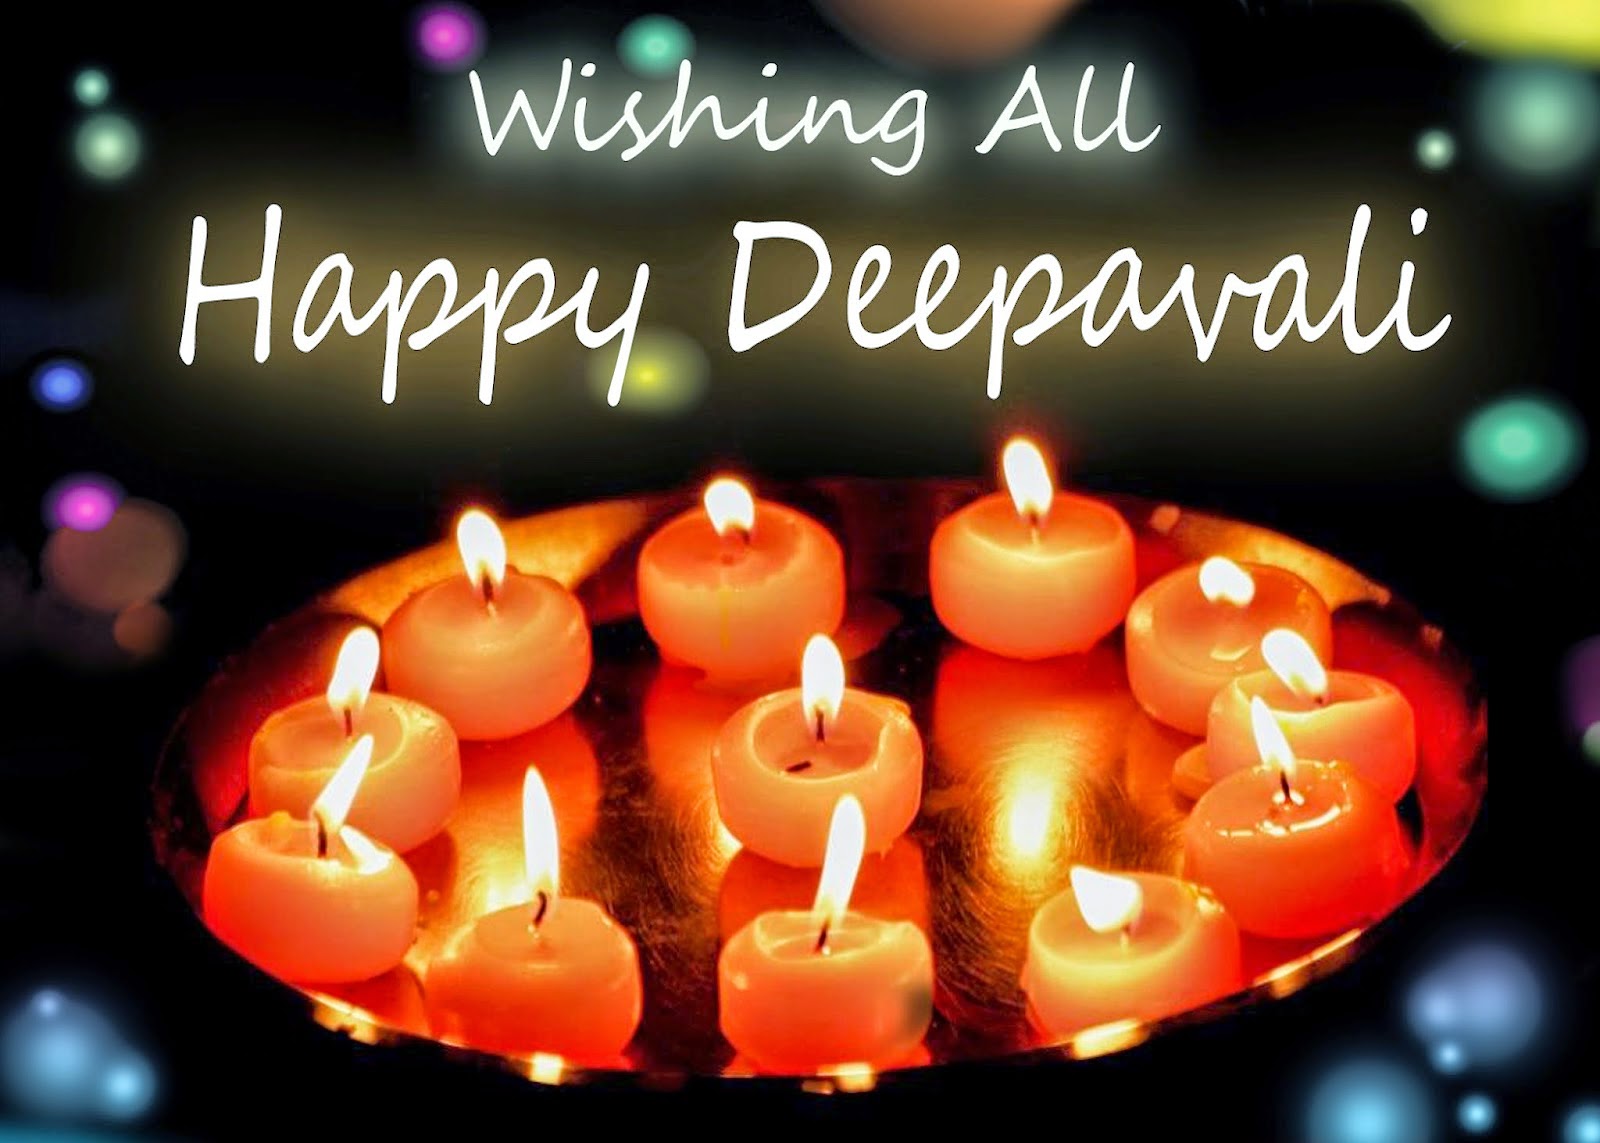 Happy Deepavali 2015 Images,Wishes,Quotes,Greetings